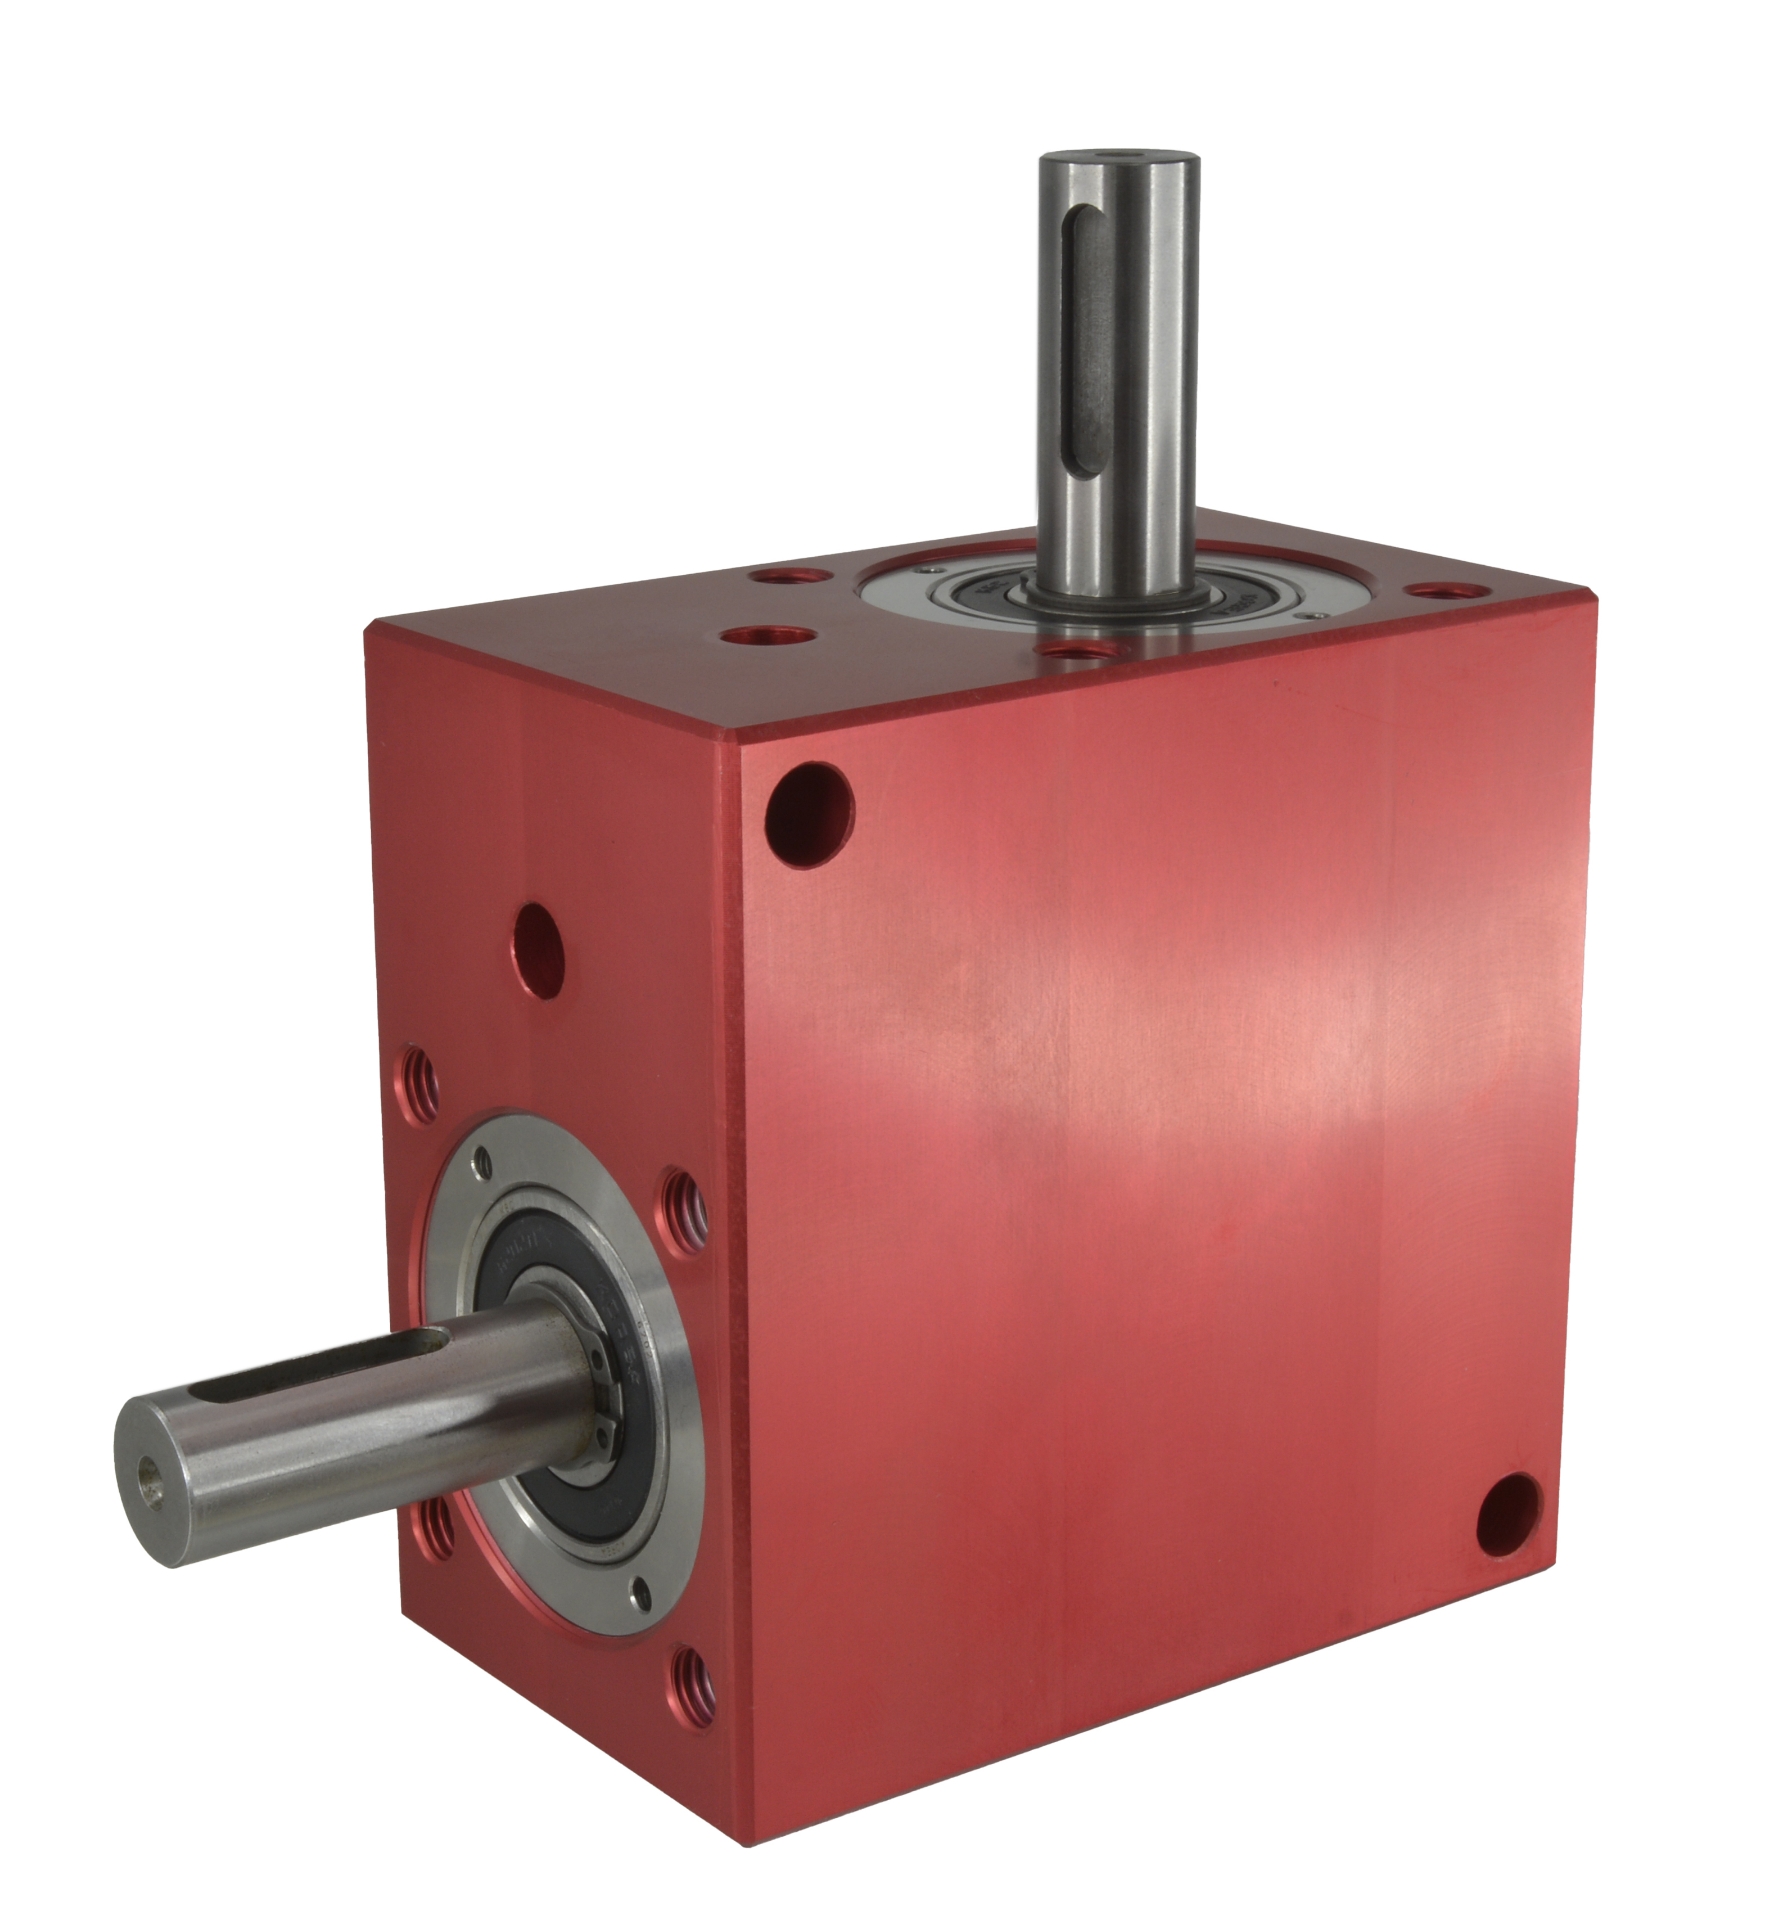 Right Angle Gearbox Series 200 1:1 Ratio 1 Shaft